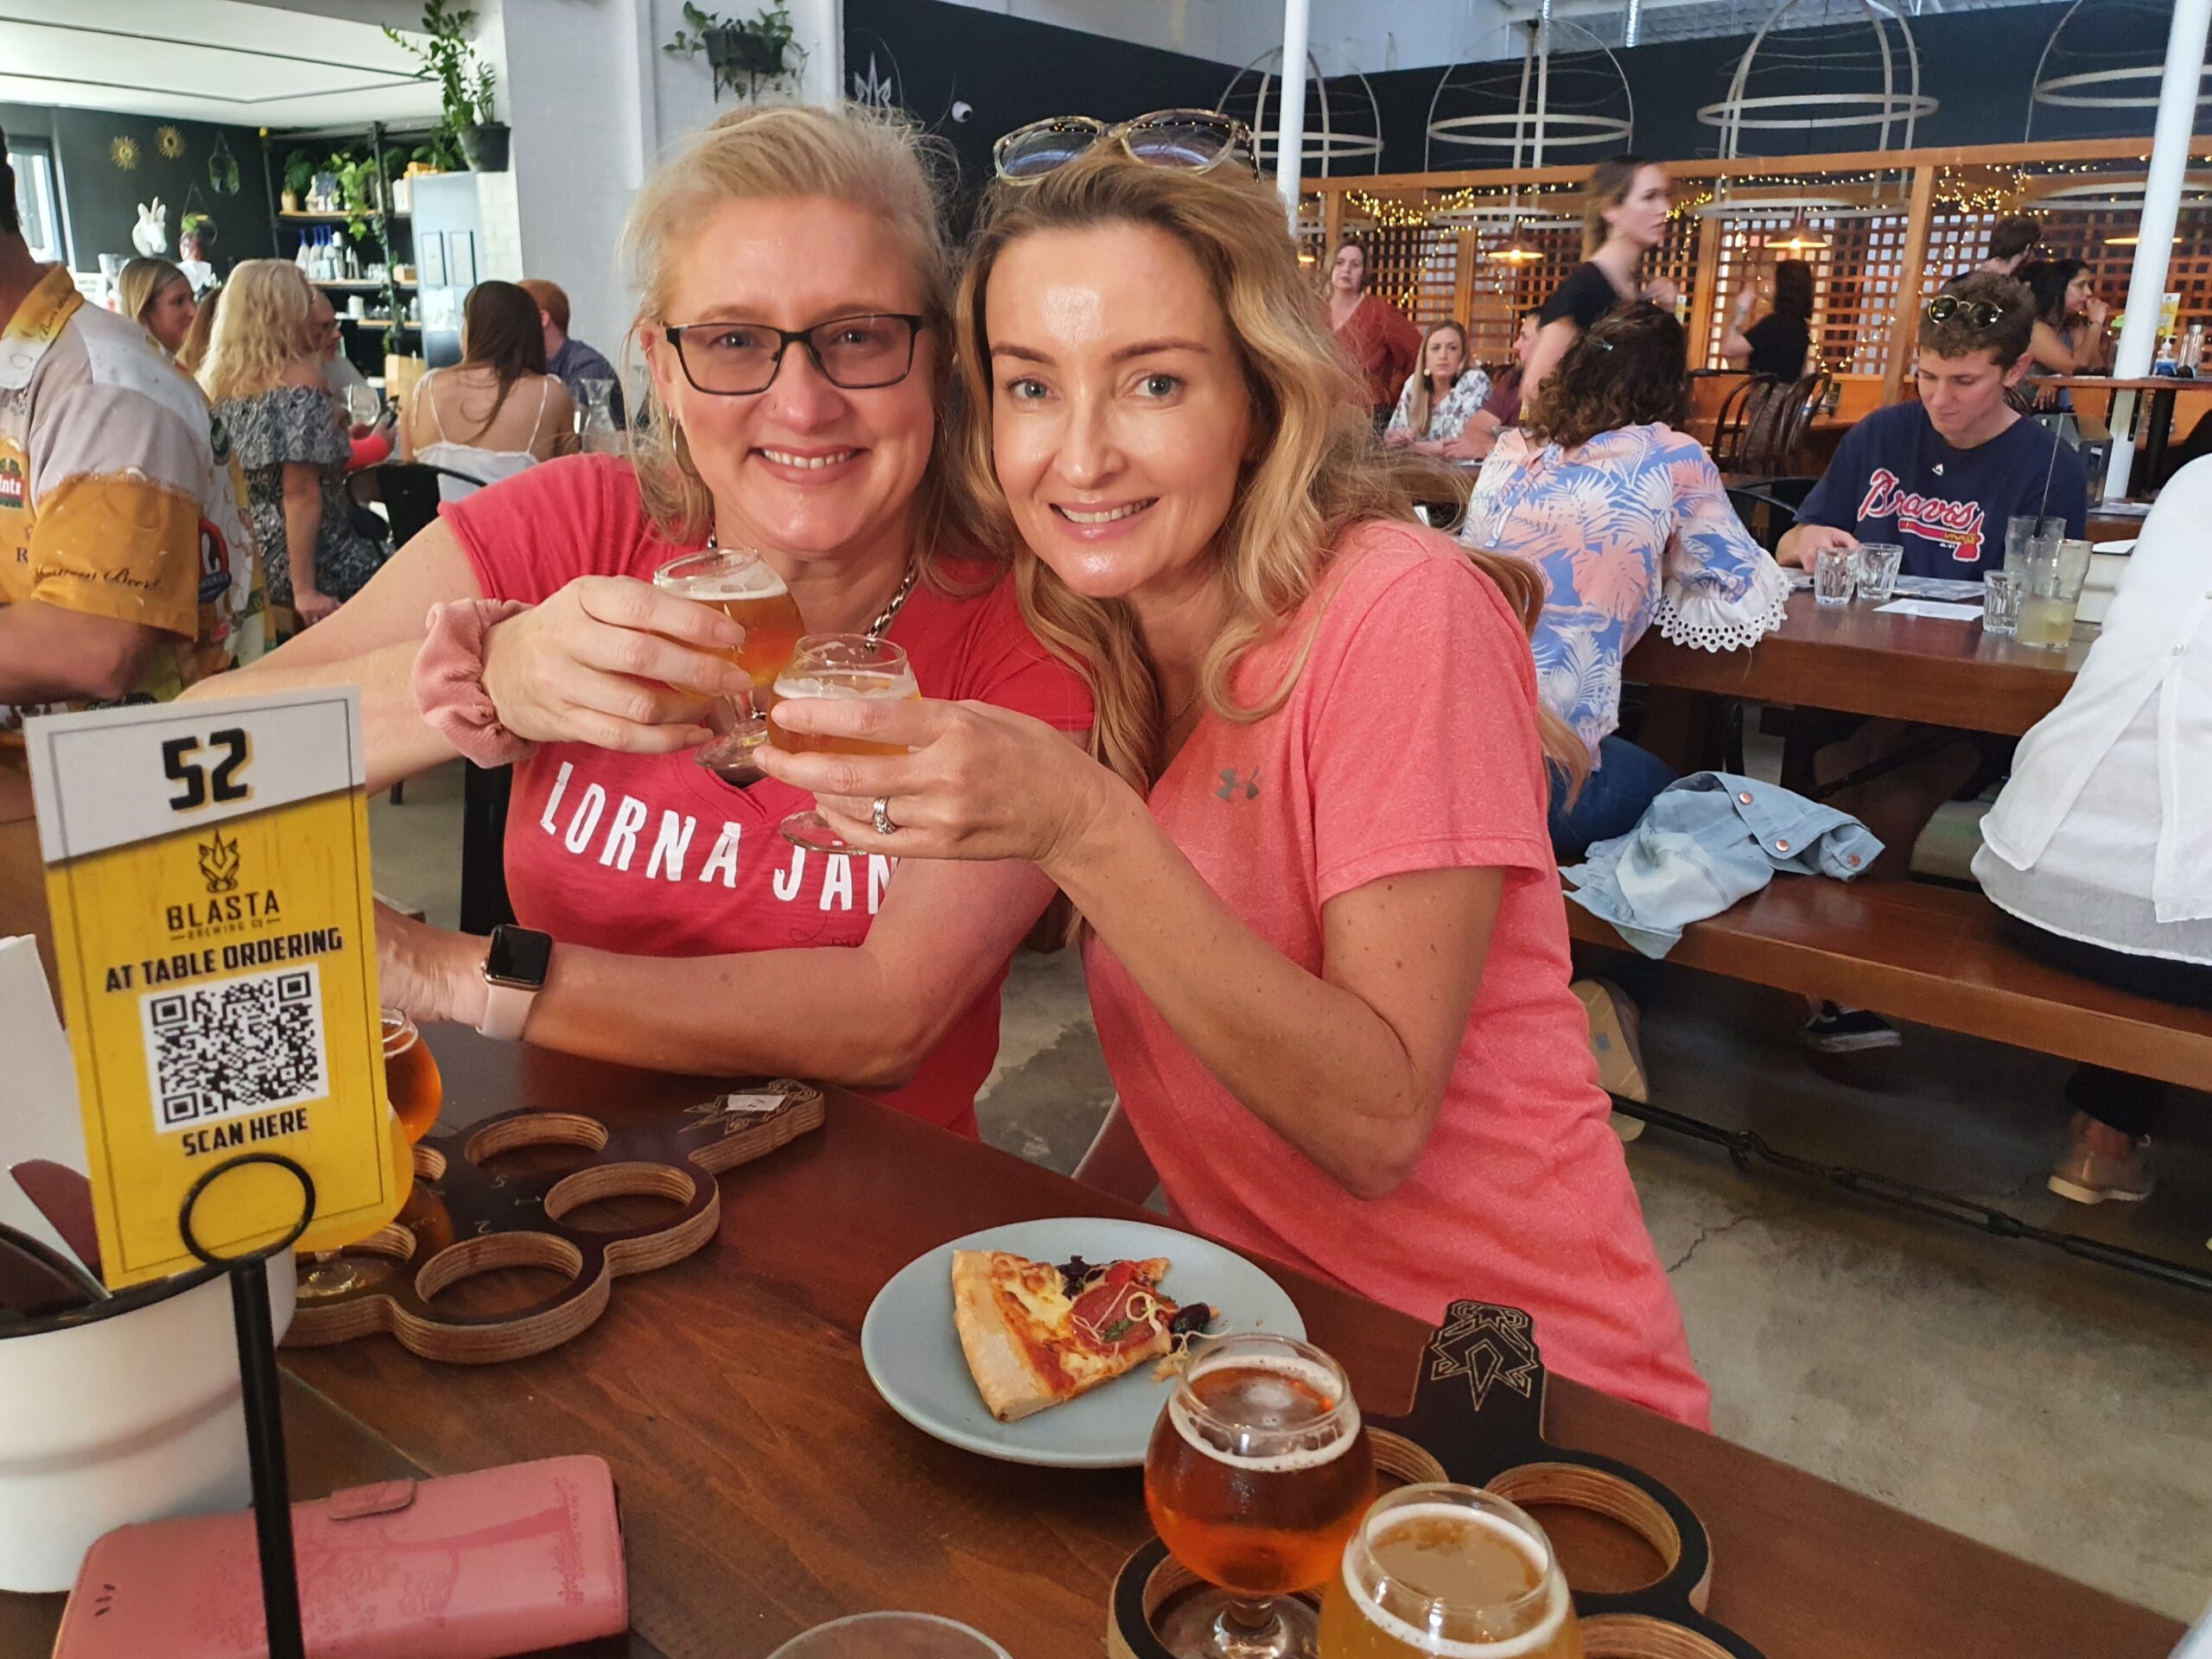 Bike and Brew - Guided bike tour of Perth foreshores and micro breweries